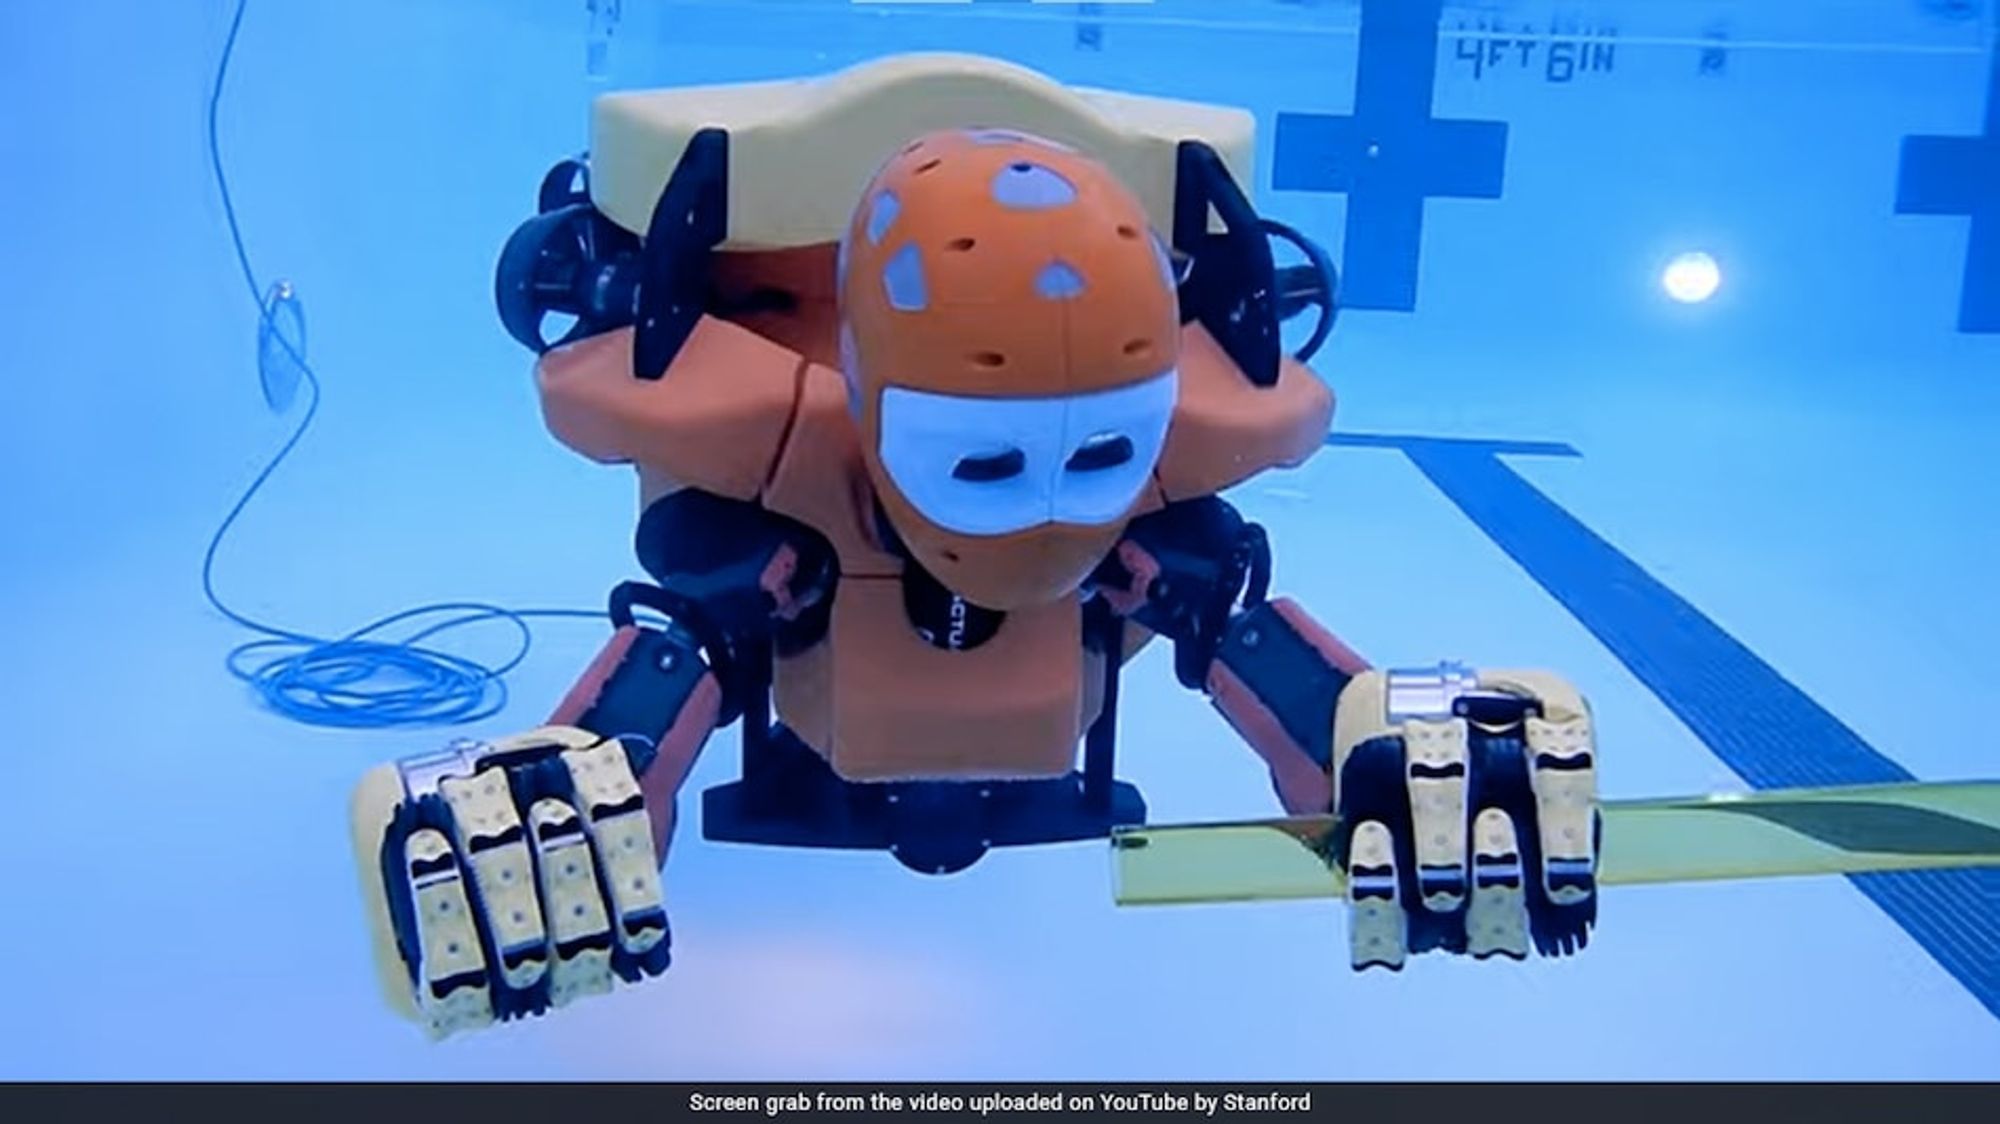 How a Humanoid Robot Is Helping Scientists Explore Shipwrecks | Technology News